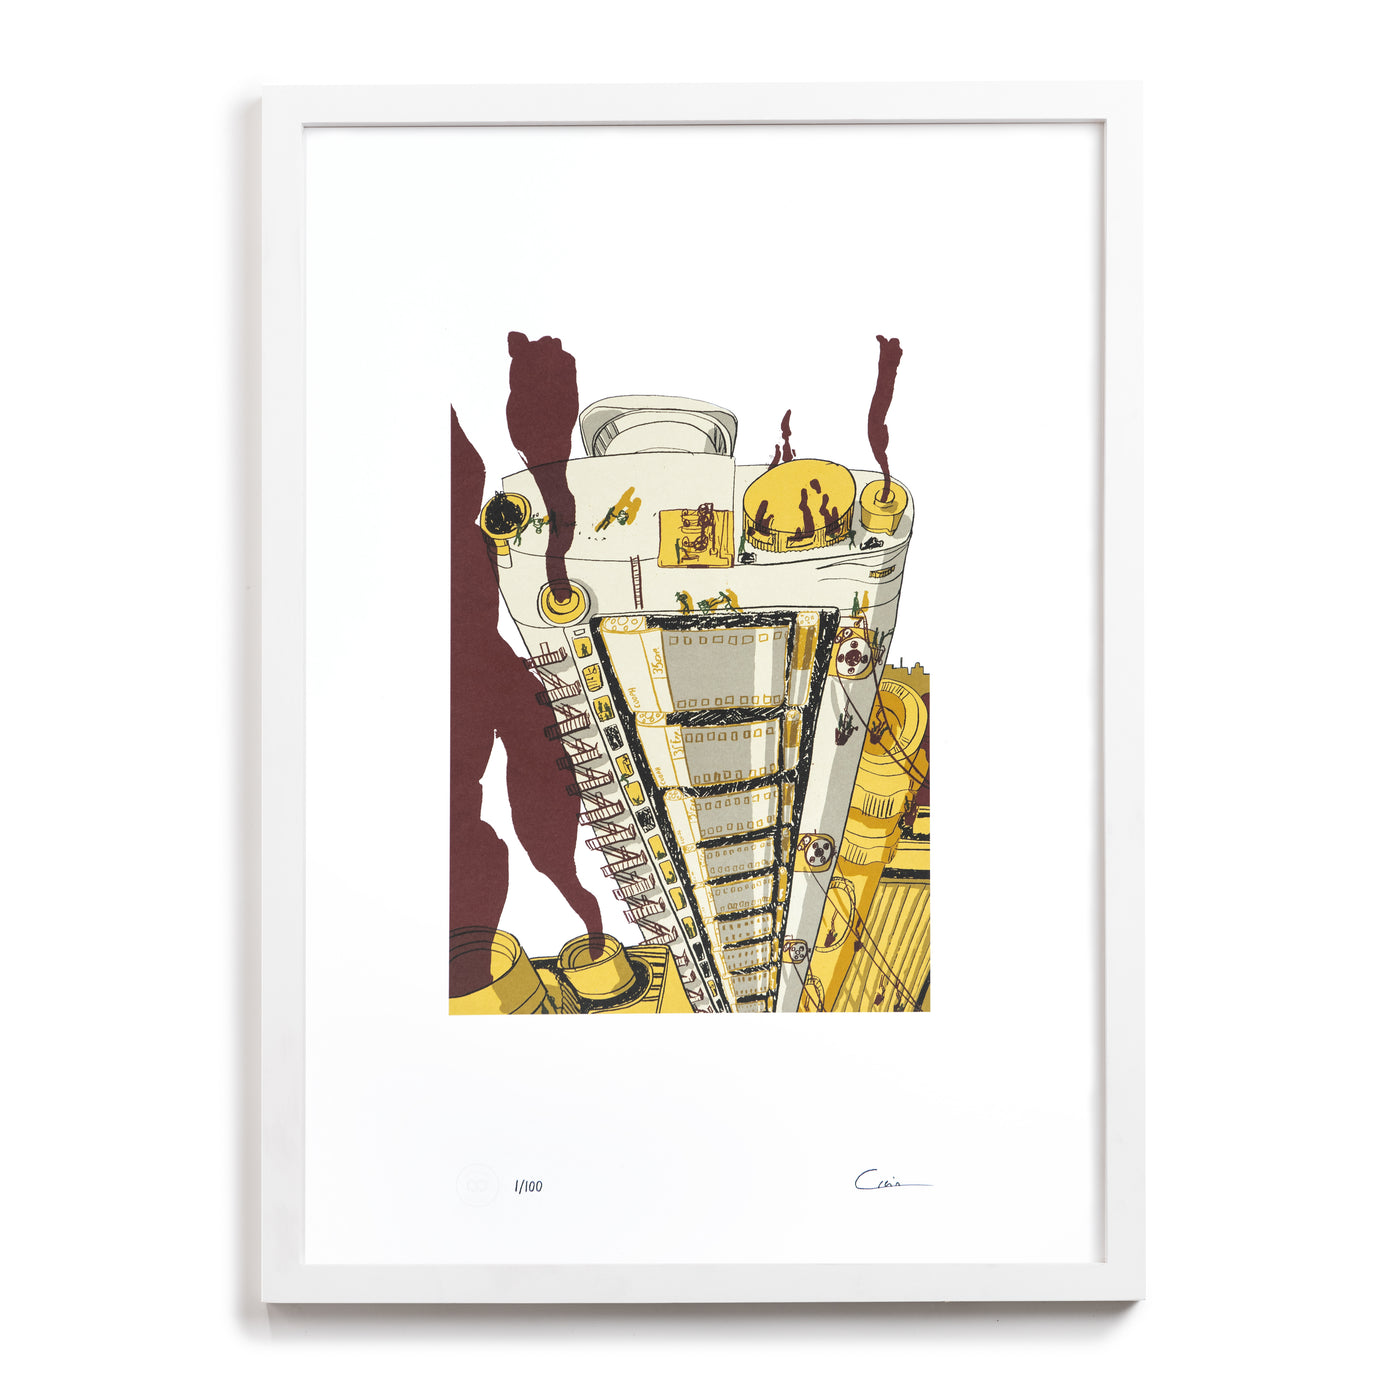 Art Print CITY by Julian Grein - Limited Edition